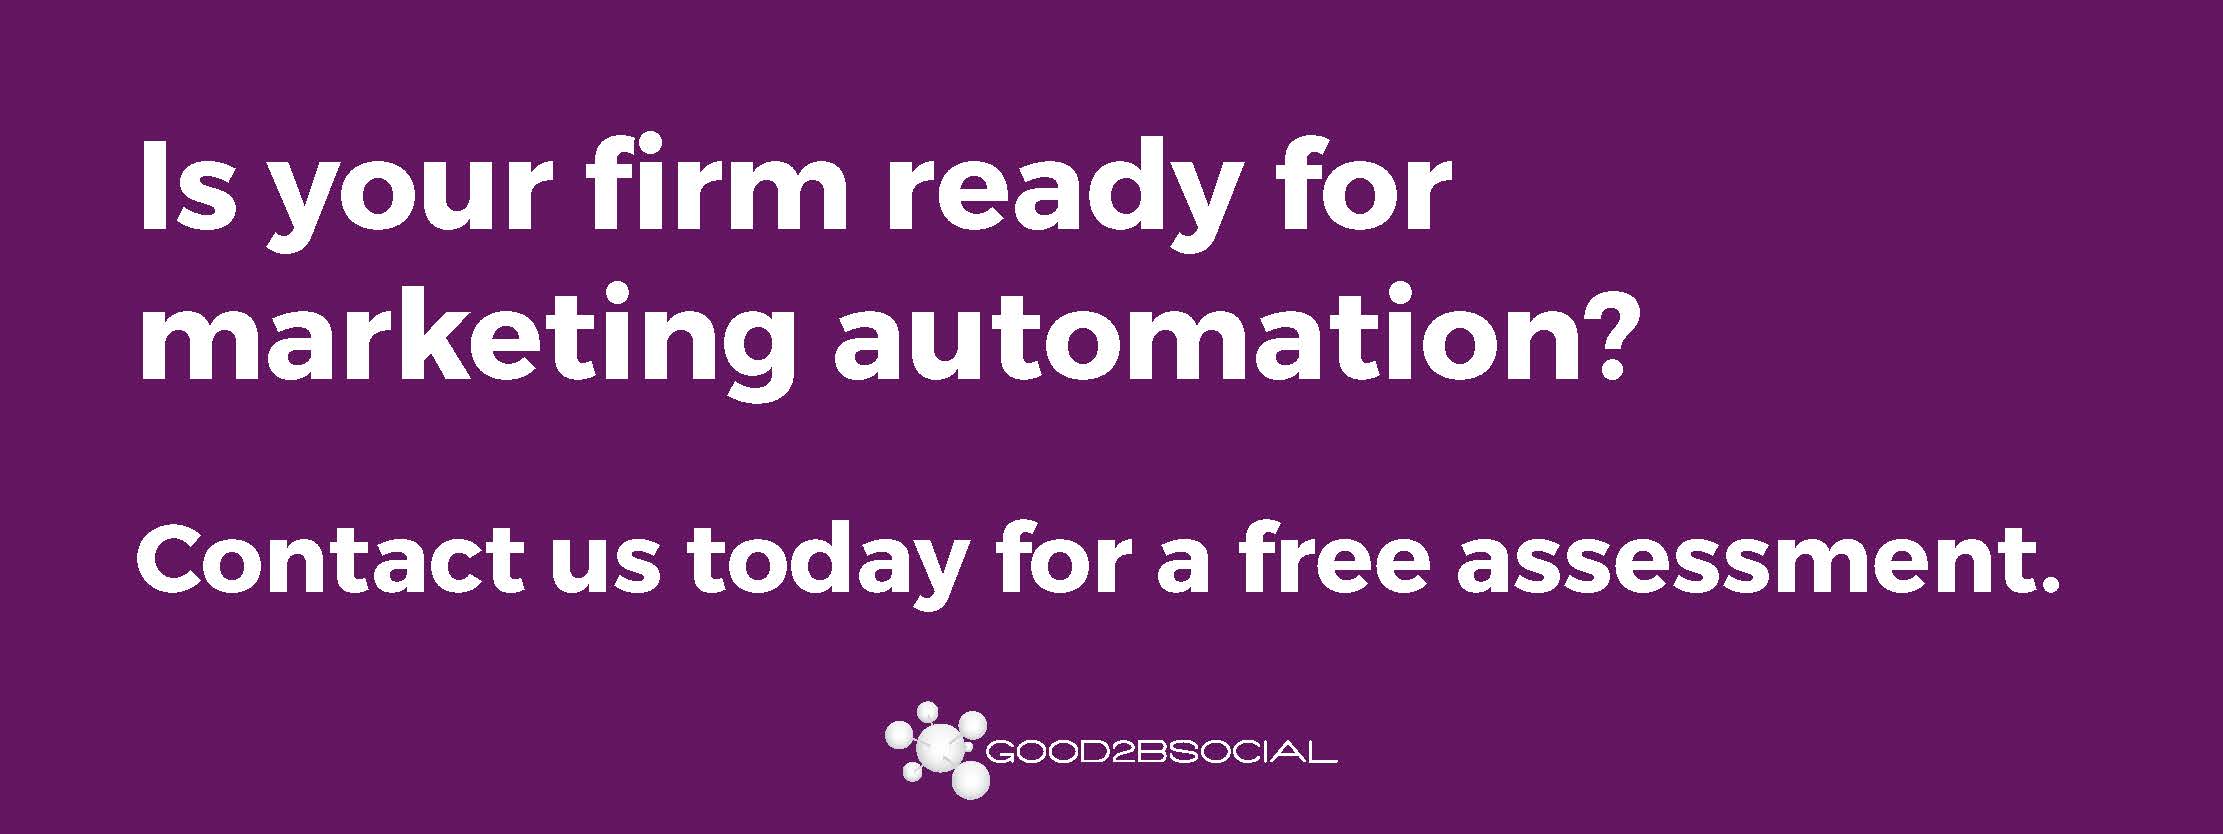 marketing automation for the legal industry